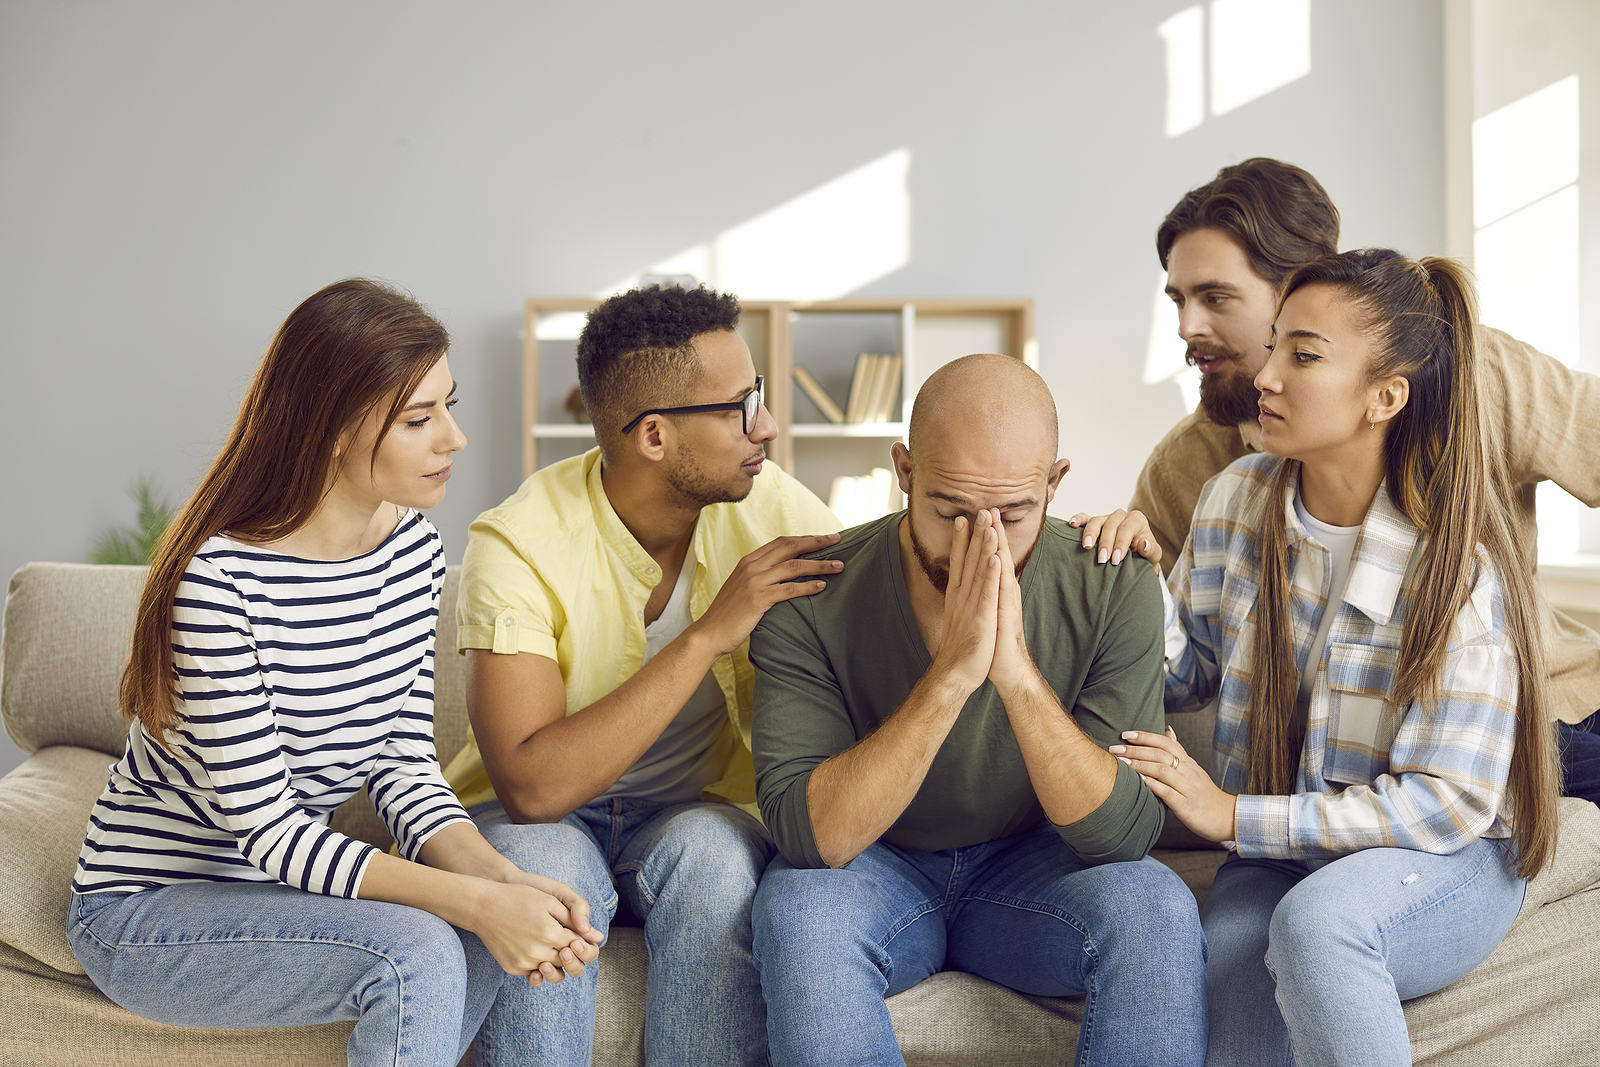 A group of friends sit next to their friend comforting him while he sits frustrated with his hands on his face.